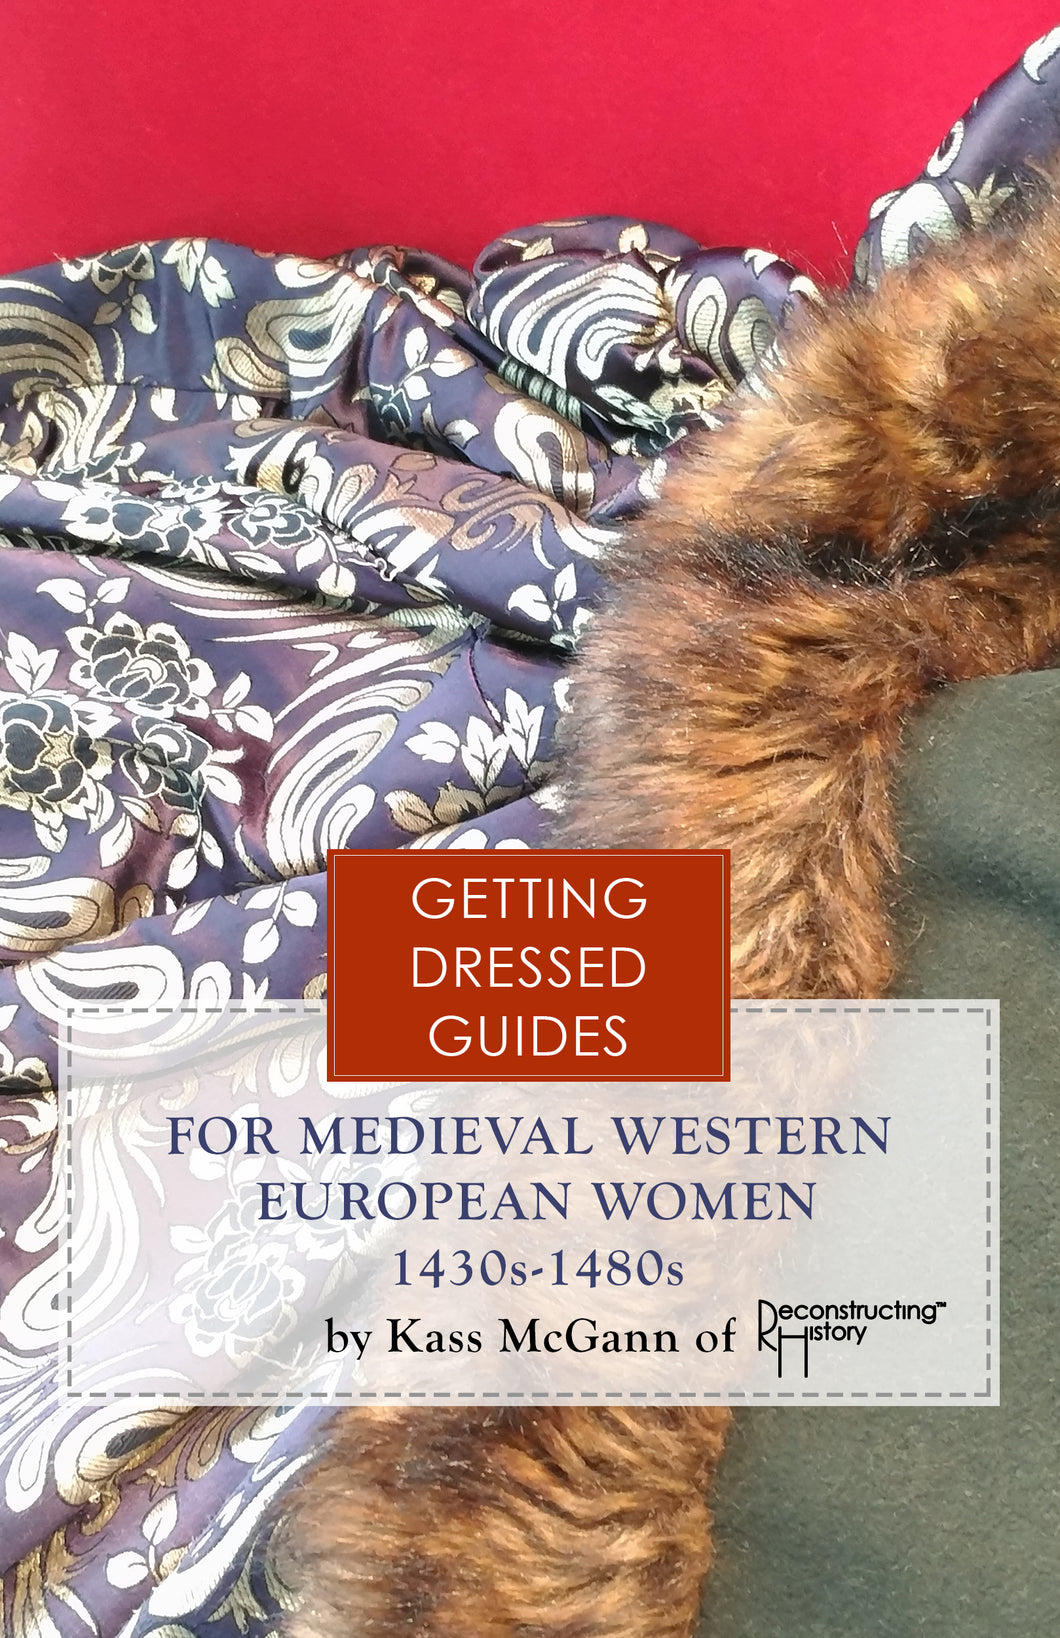 15th century Women's Getting Dressed Guide